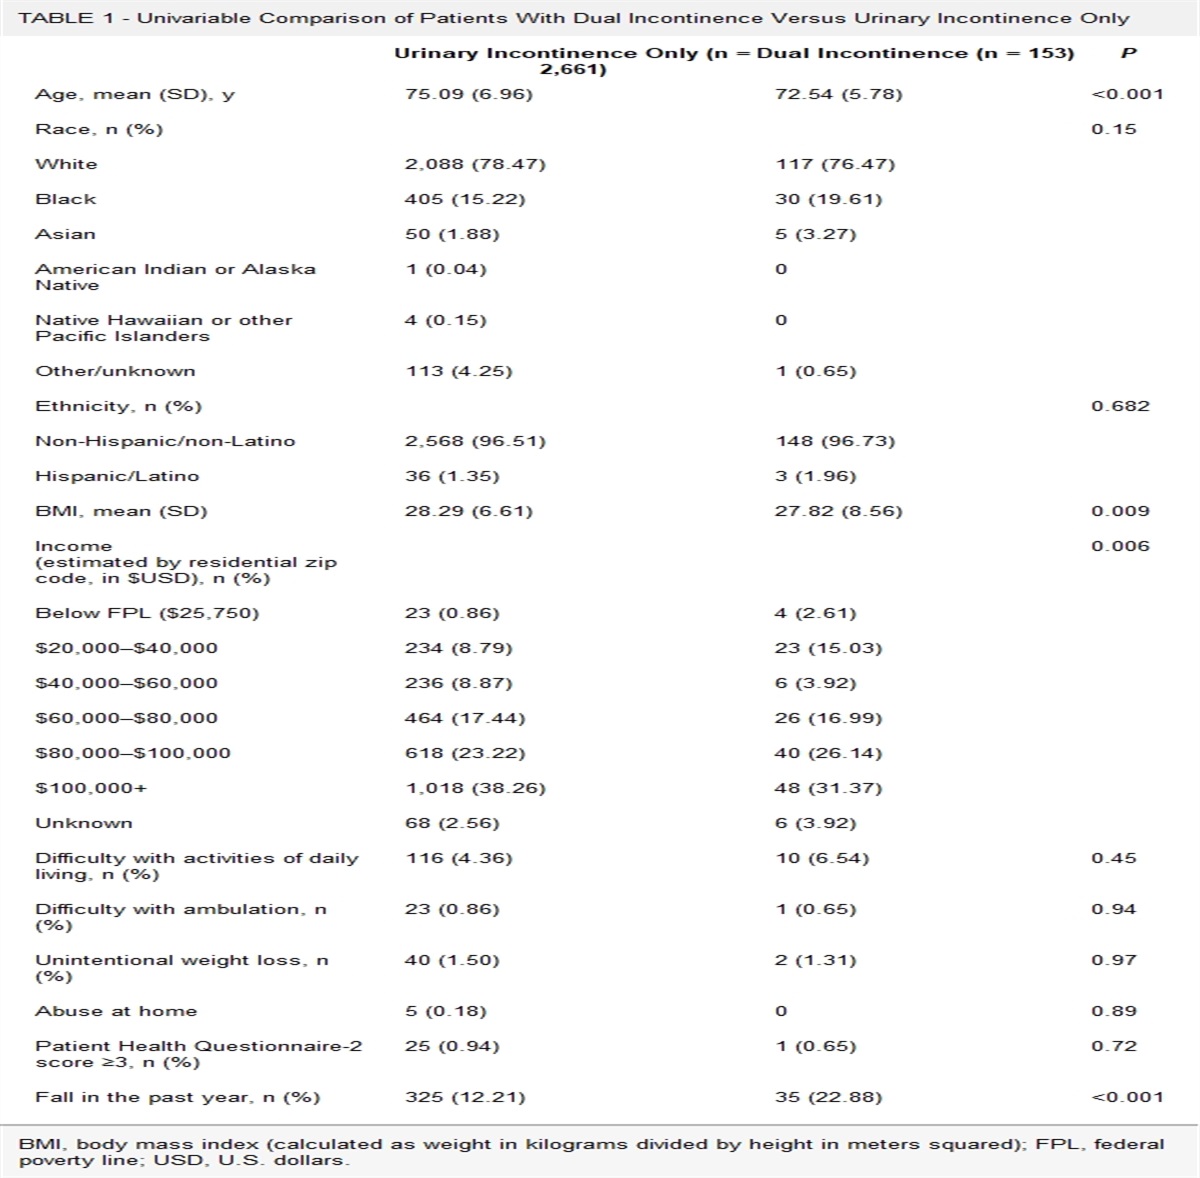 Dual Incontinence and Risk of Fall: A Retrospective Cohort Study